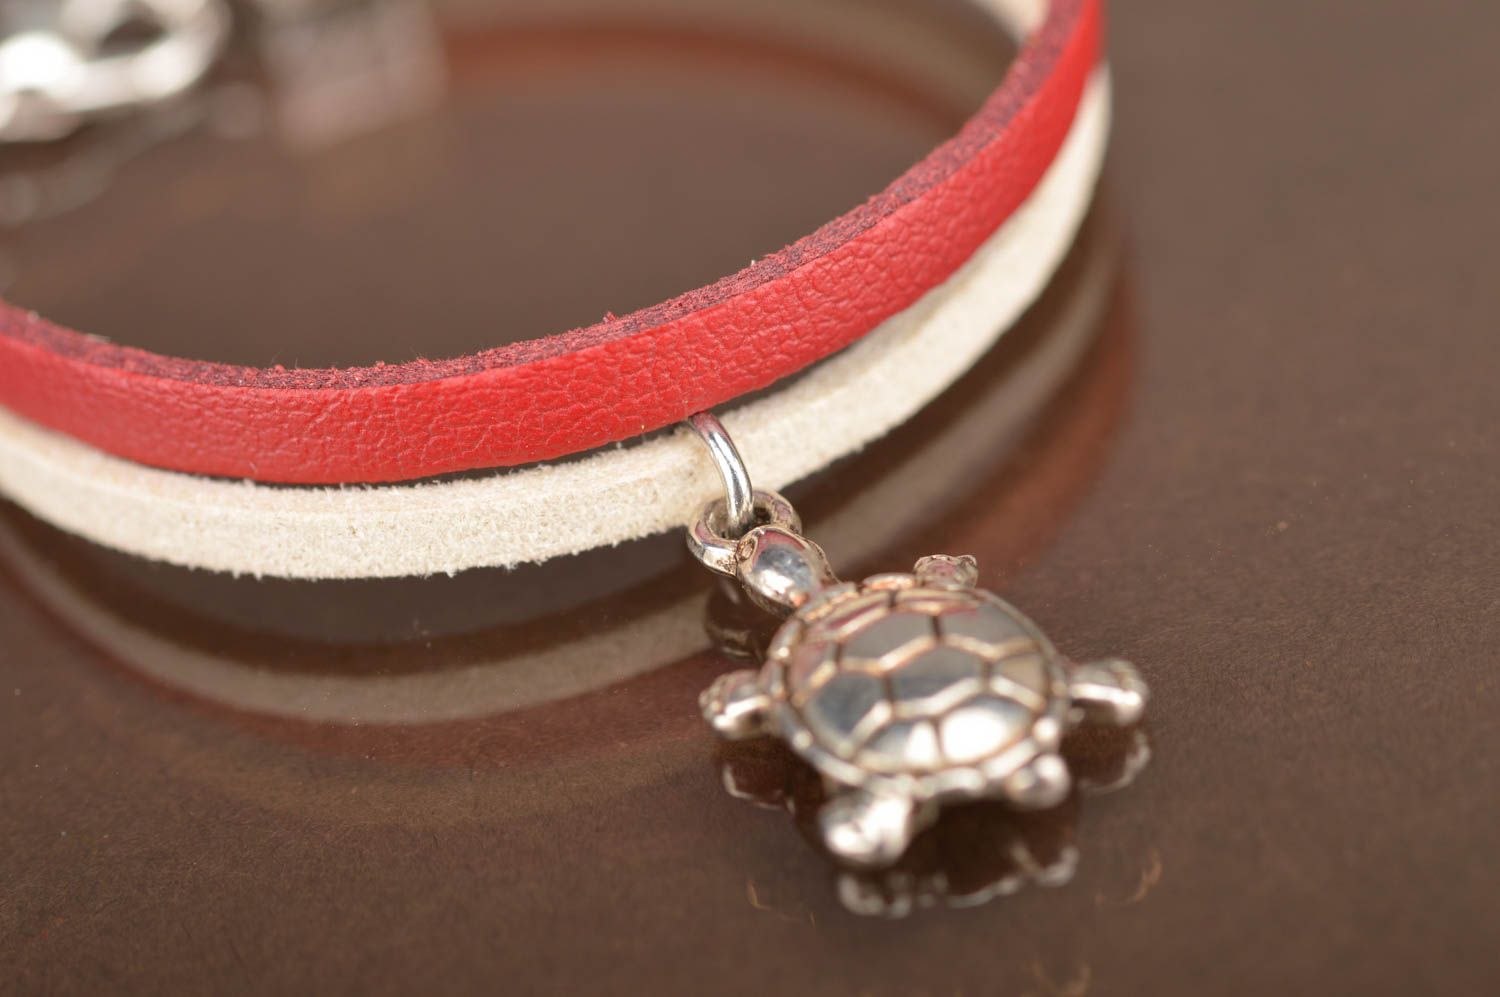 Handmade red and white leather wrist bracelet with turtle charm for kids photo 3